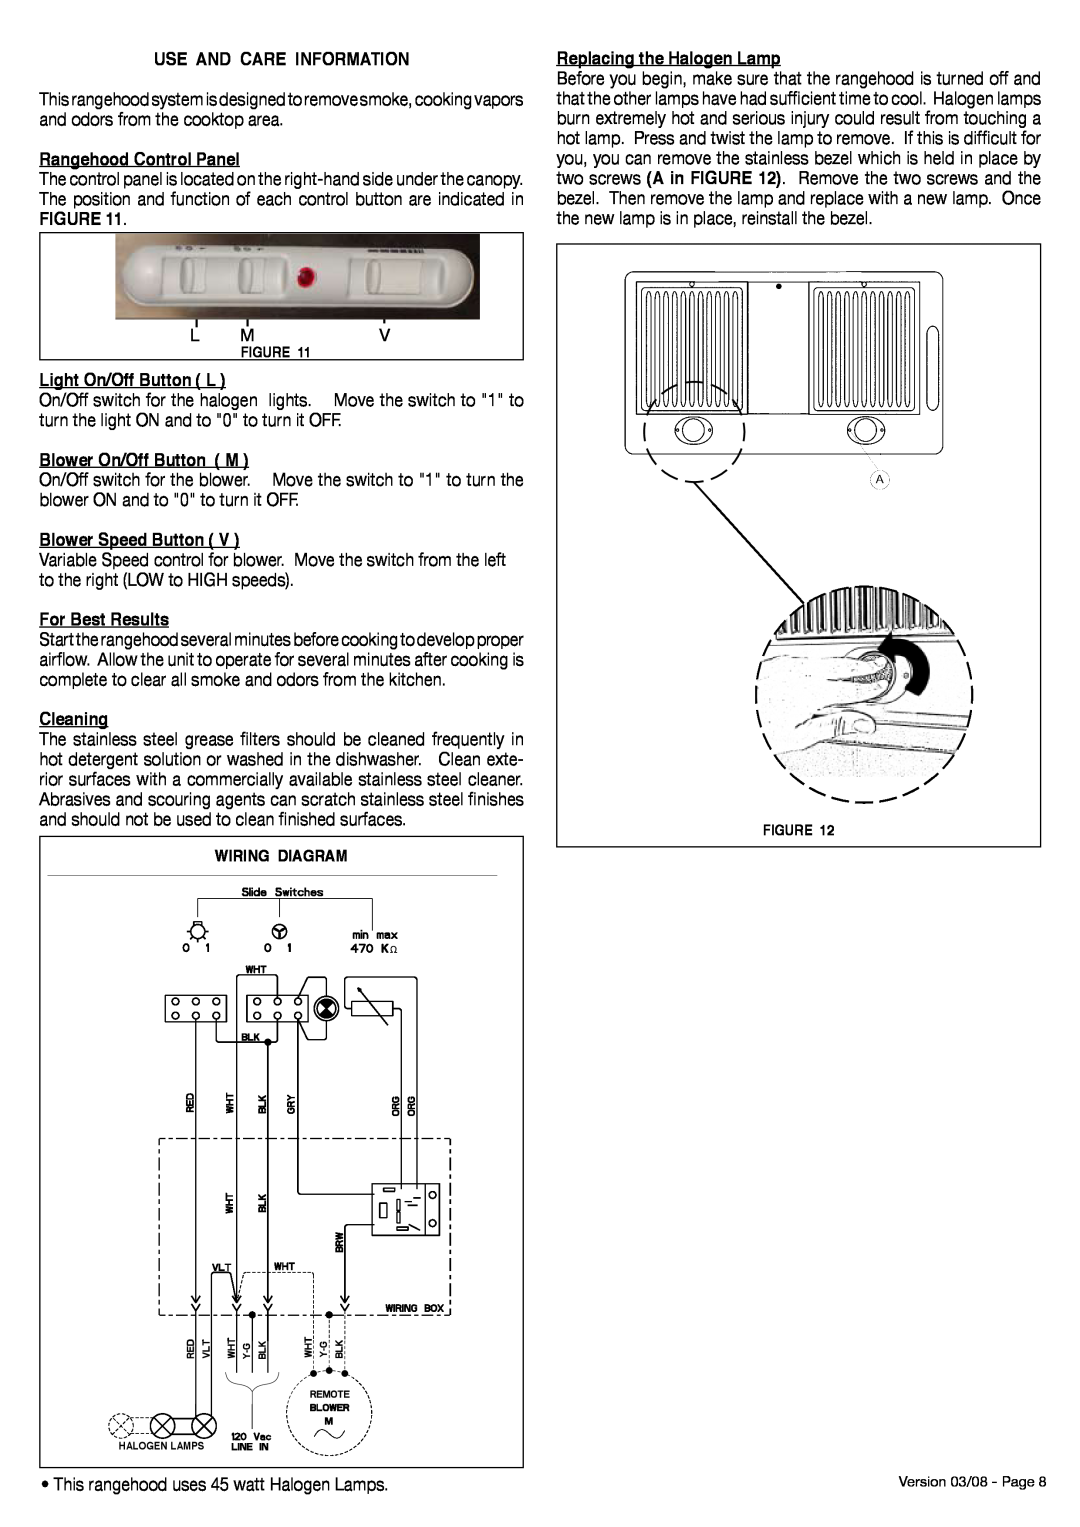 Faber 630003952 Use And Care Information, Rangehood Control Panel, Replacing the Halogen Lamp, Light On/Off Button L 